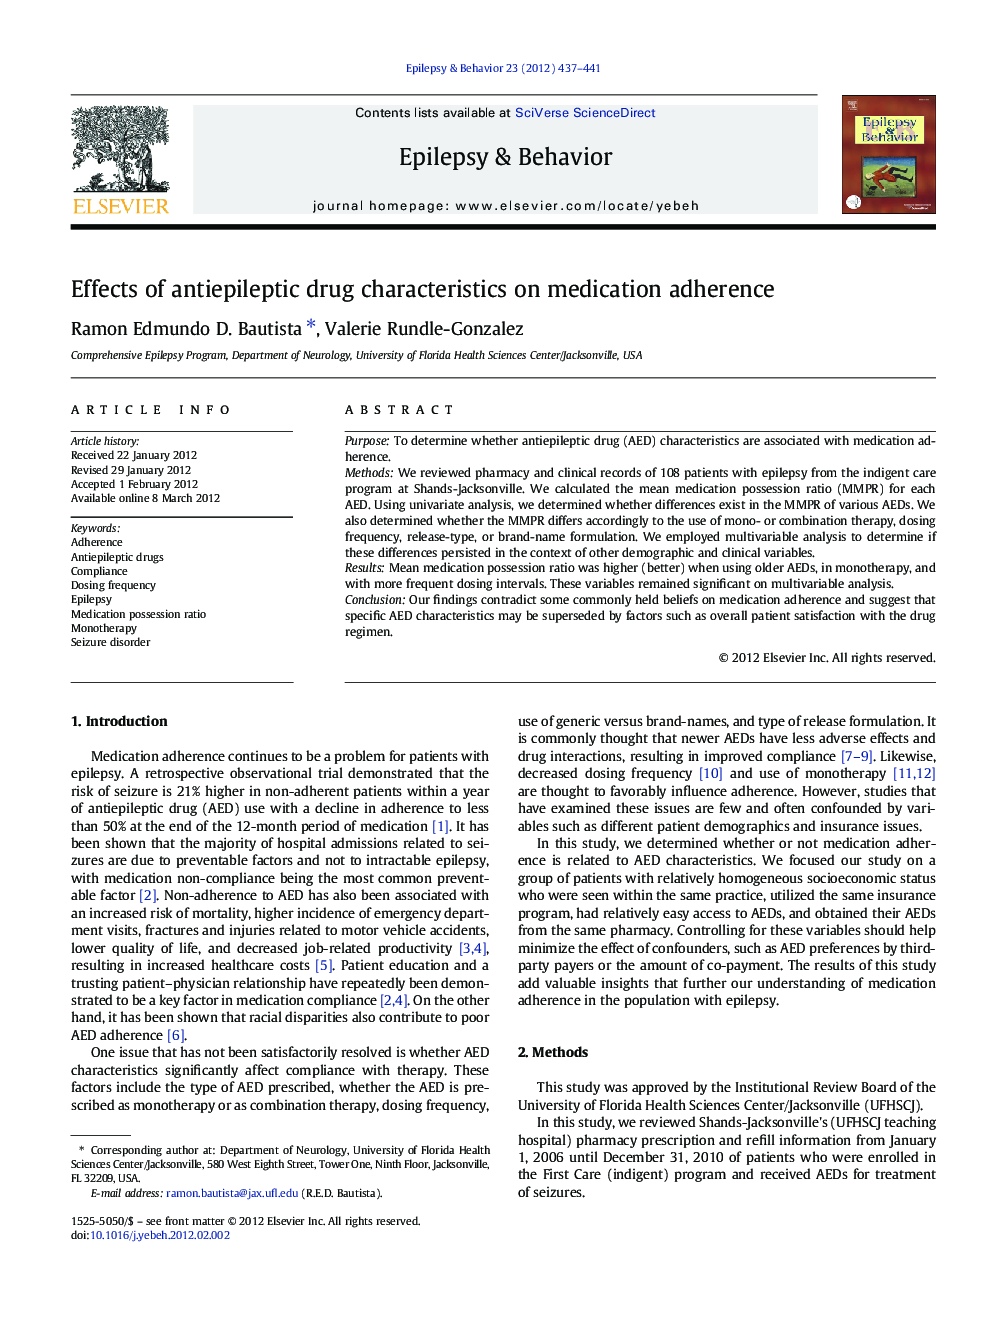 Effects of antiepileptic drug characteristics on medication adherence